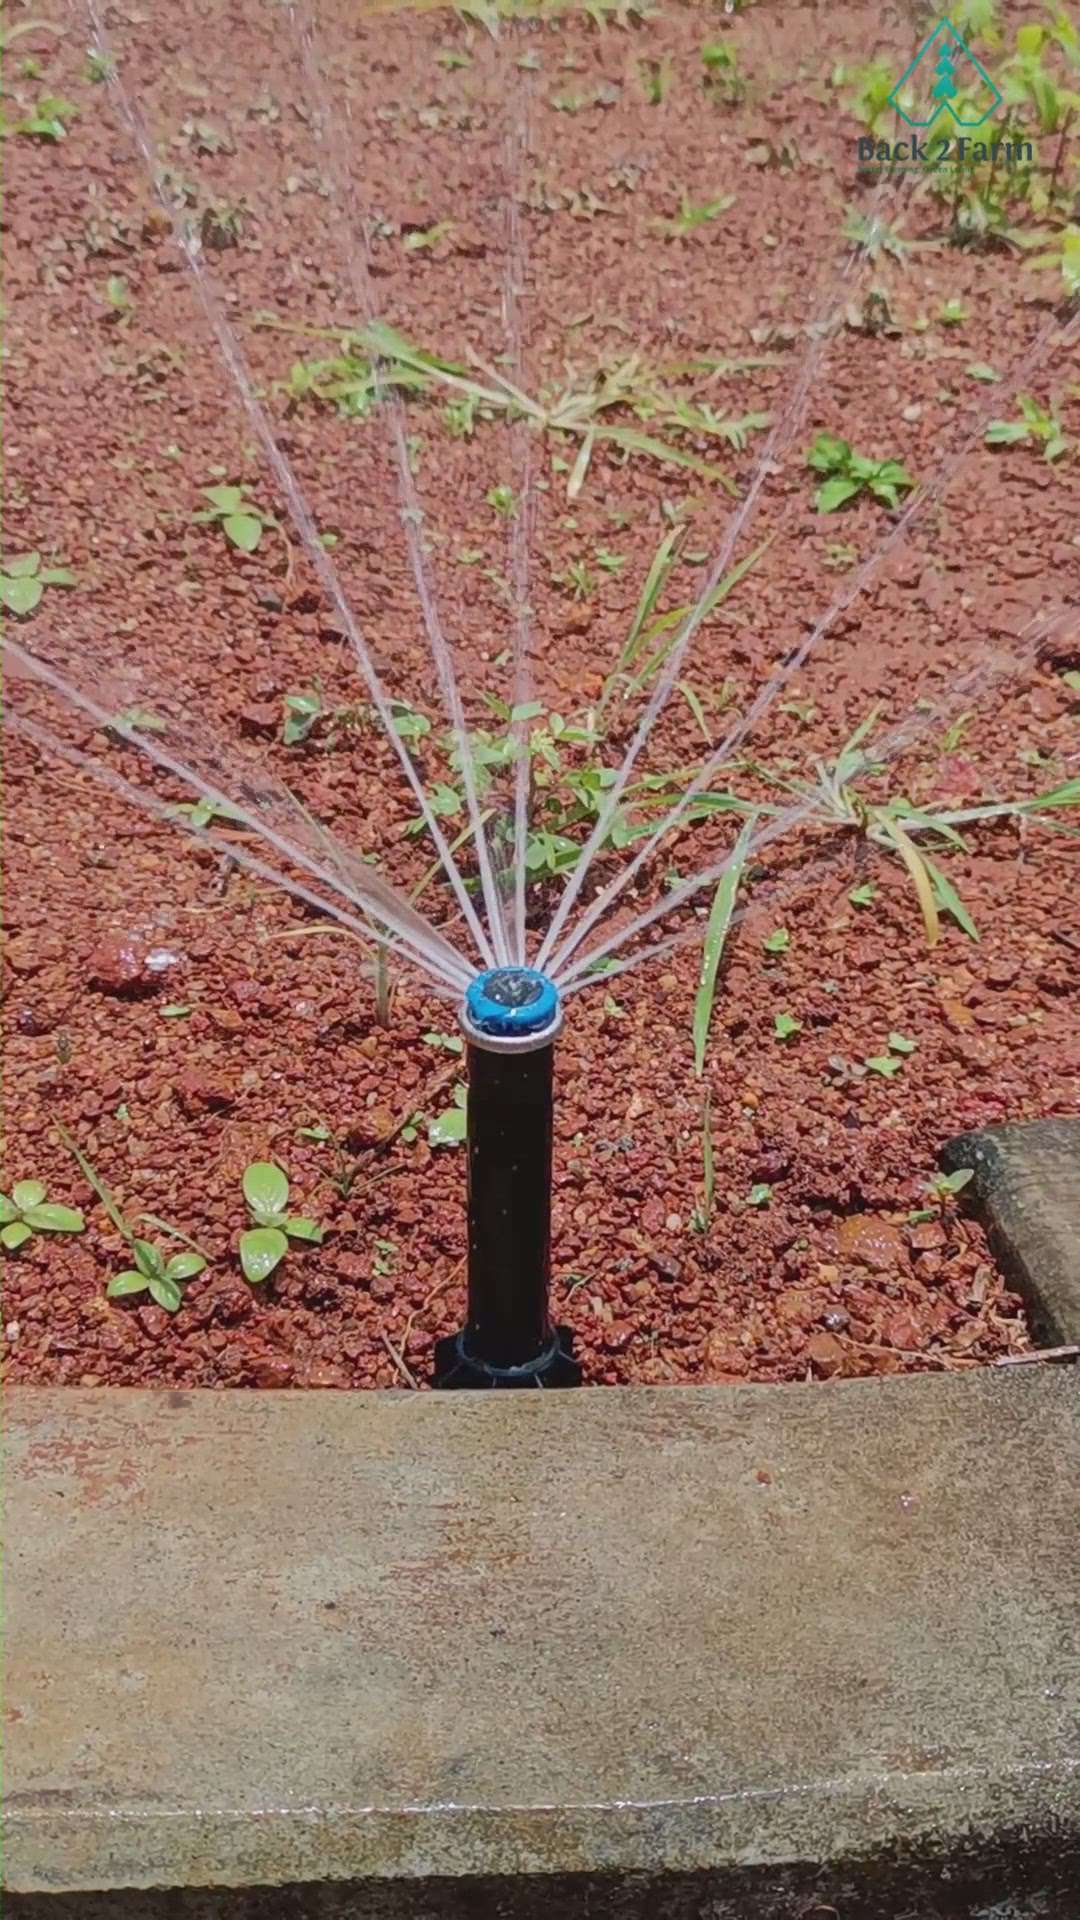 Sprinklers can be used to water your plants or your lawns.Notice how the sprinklers can be set to  water only the portions we need . #LandscapeDesign #irrigation #plants #sprinkler #sustainableliving #farming #garden